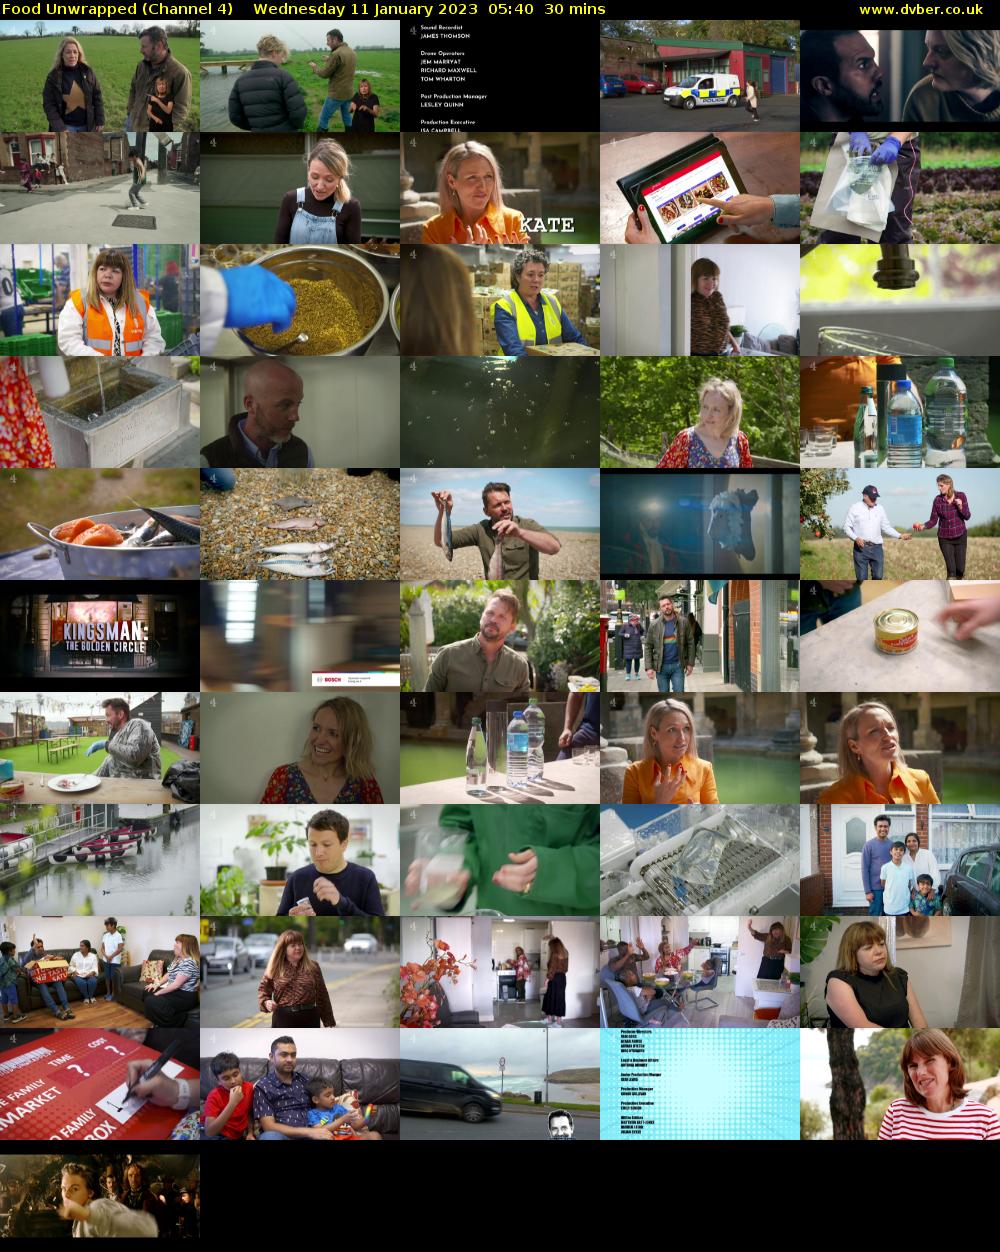 Food Unwrapped (Channel 4) Wednesday 11 January 2023 05:40 - 06:10